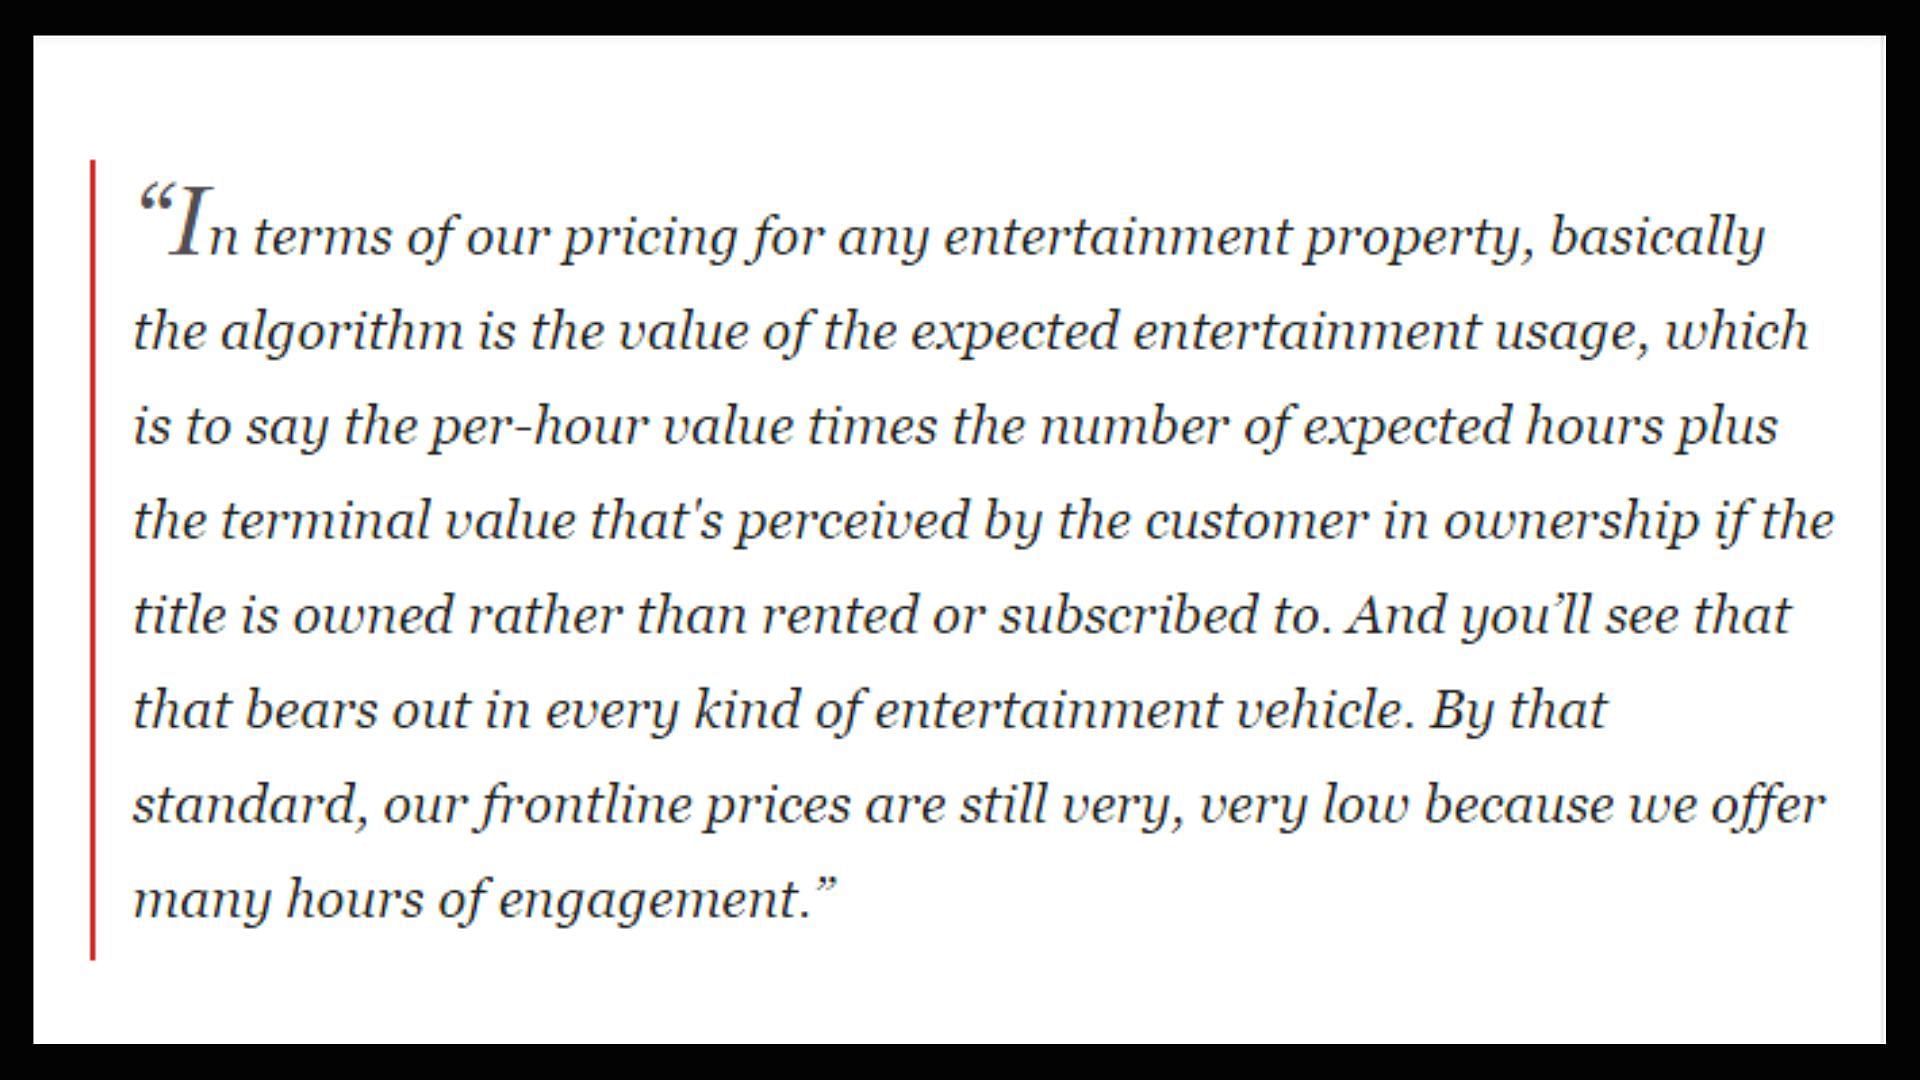 Strauss Zelnick&#039;s statement from the recent Take-Two earnings call 1/2. (Image via Sportskeeda)